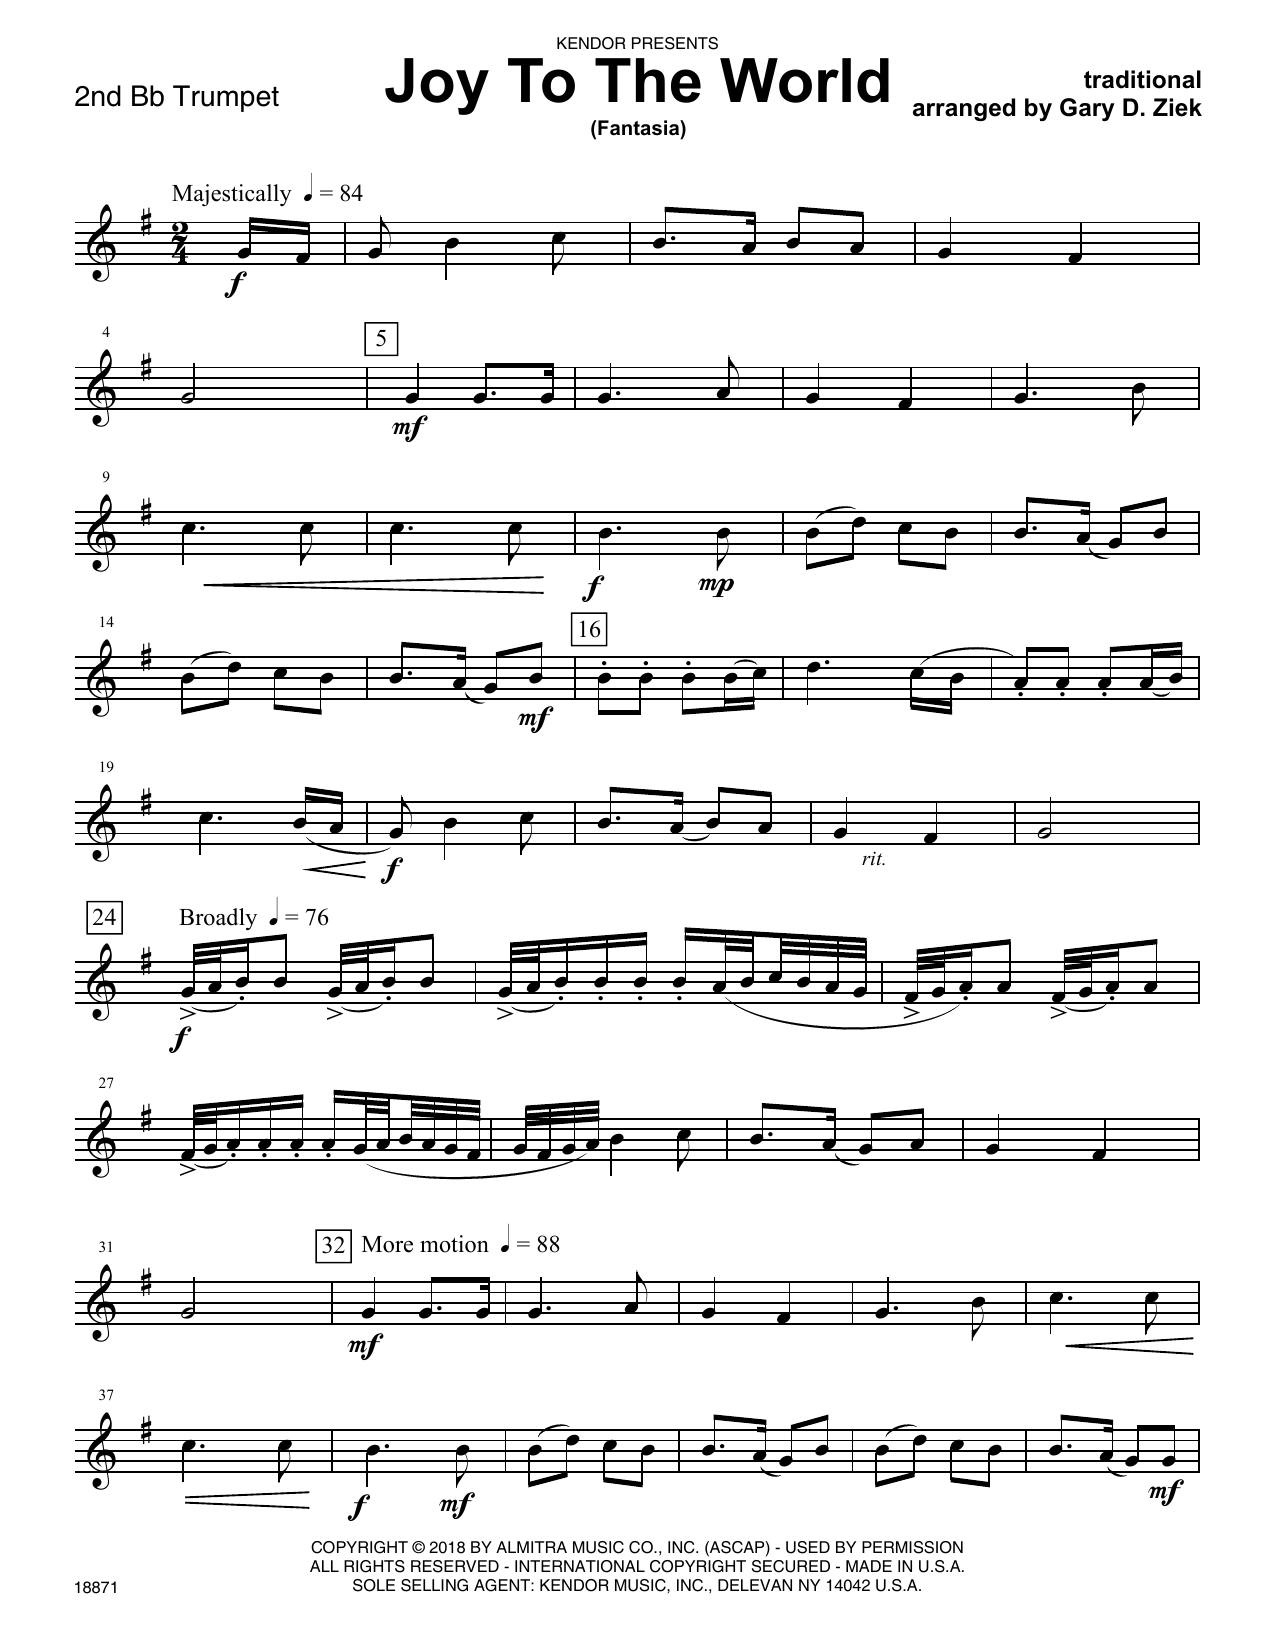 Gary Ziek Joy To The World (fantasia) - 2nd Bb Trumpet sheet music notes and chords. Download Printable PDF.